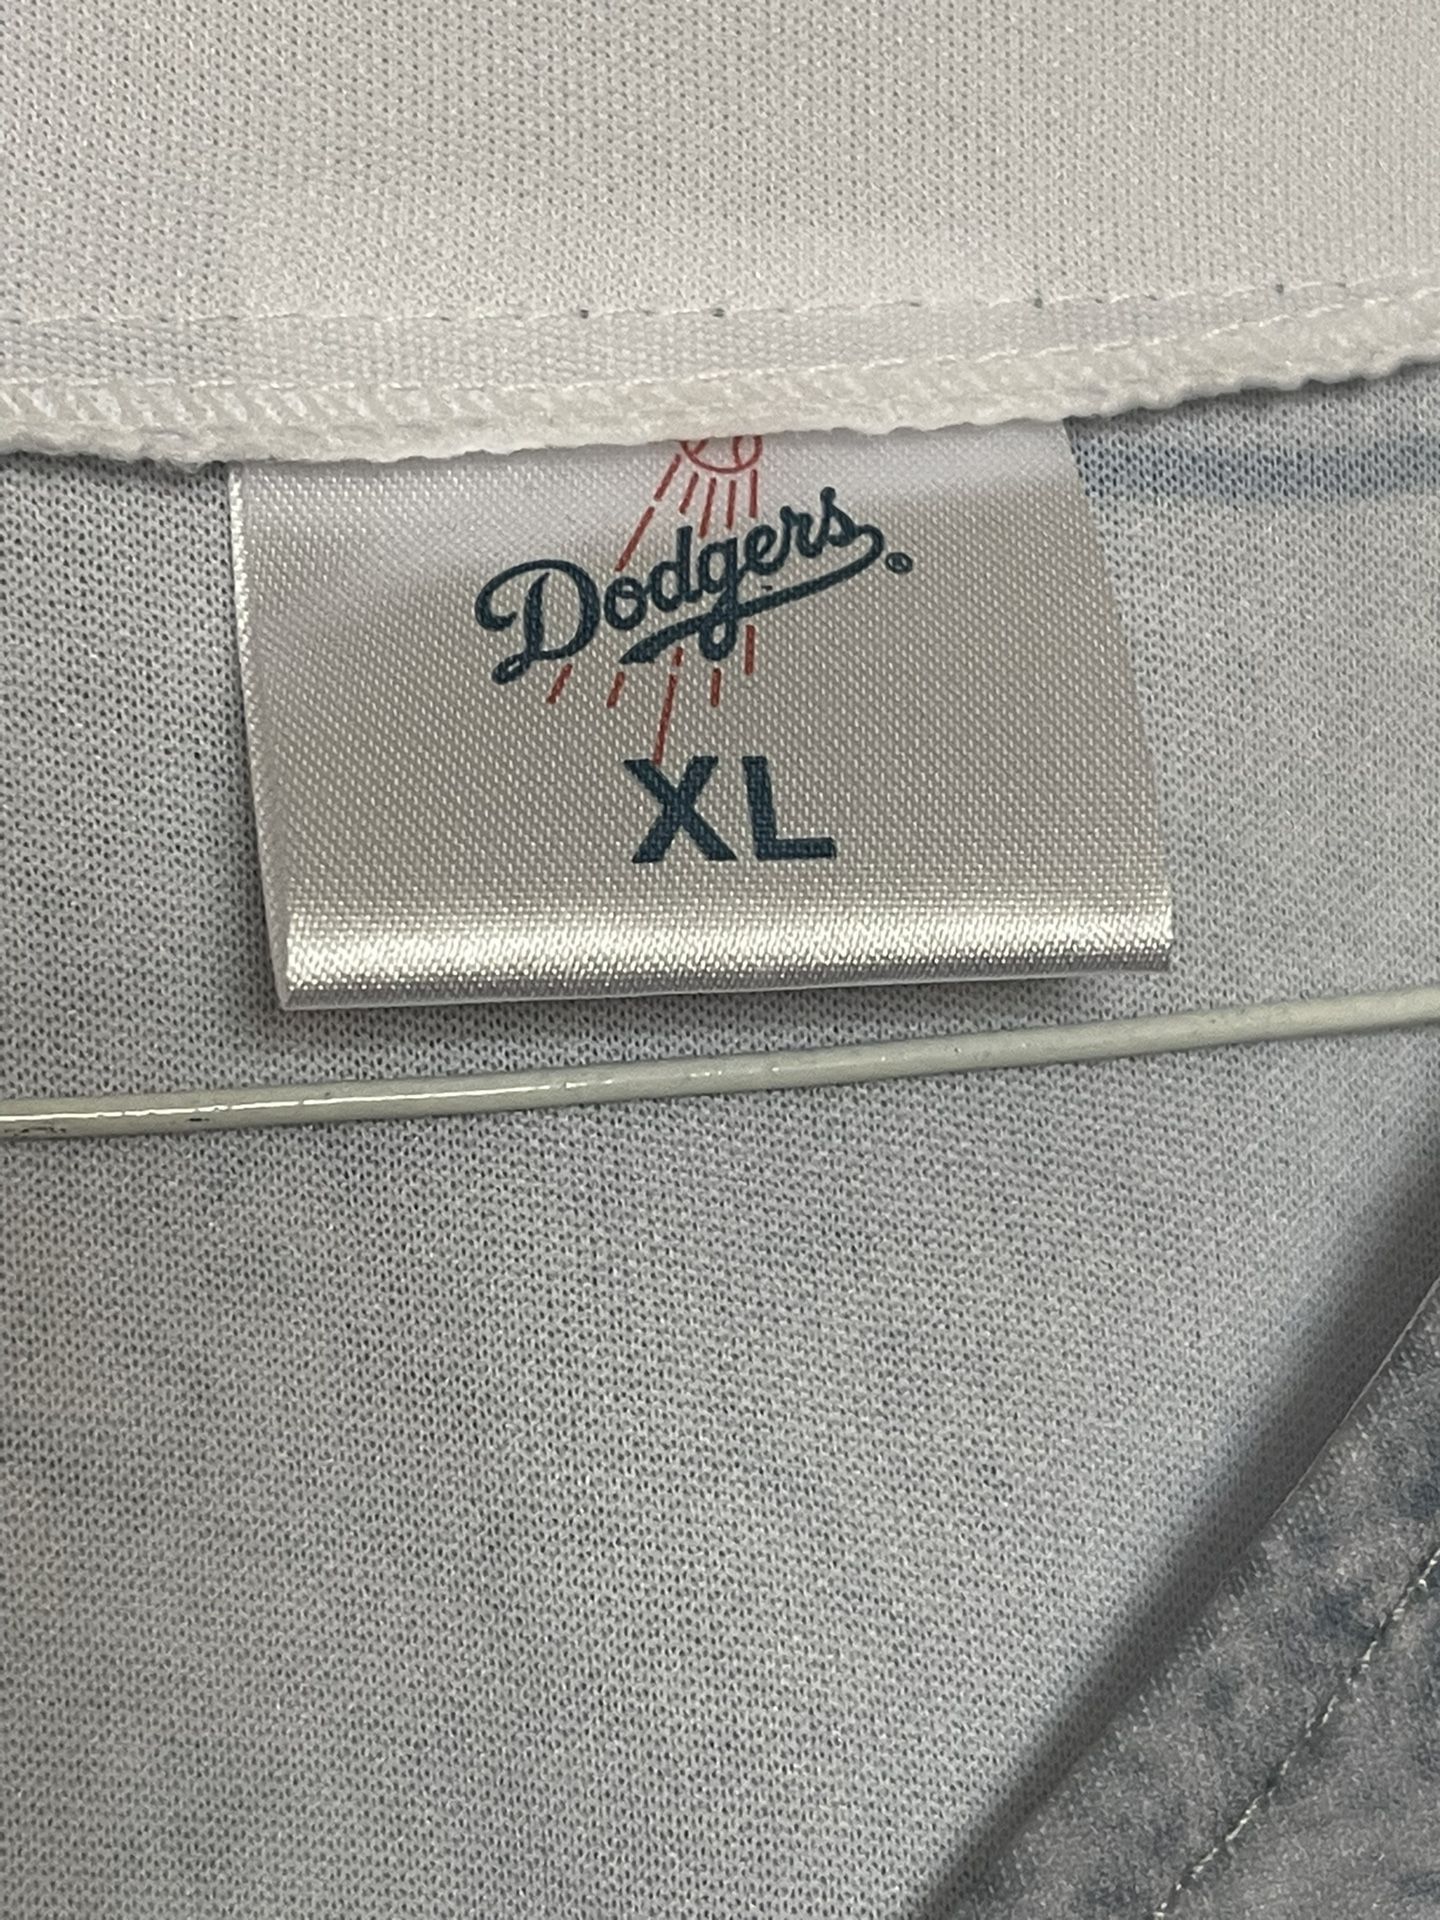 Jackie Robinson (all Sizes) Throwback White Los Ángeles Dodgers Jersey for  Sale in Raleigh, NC - OfferUp